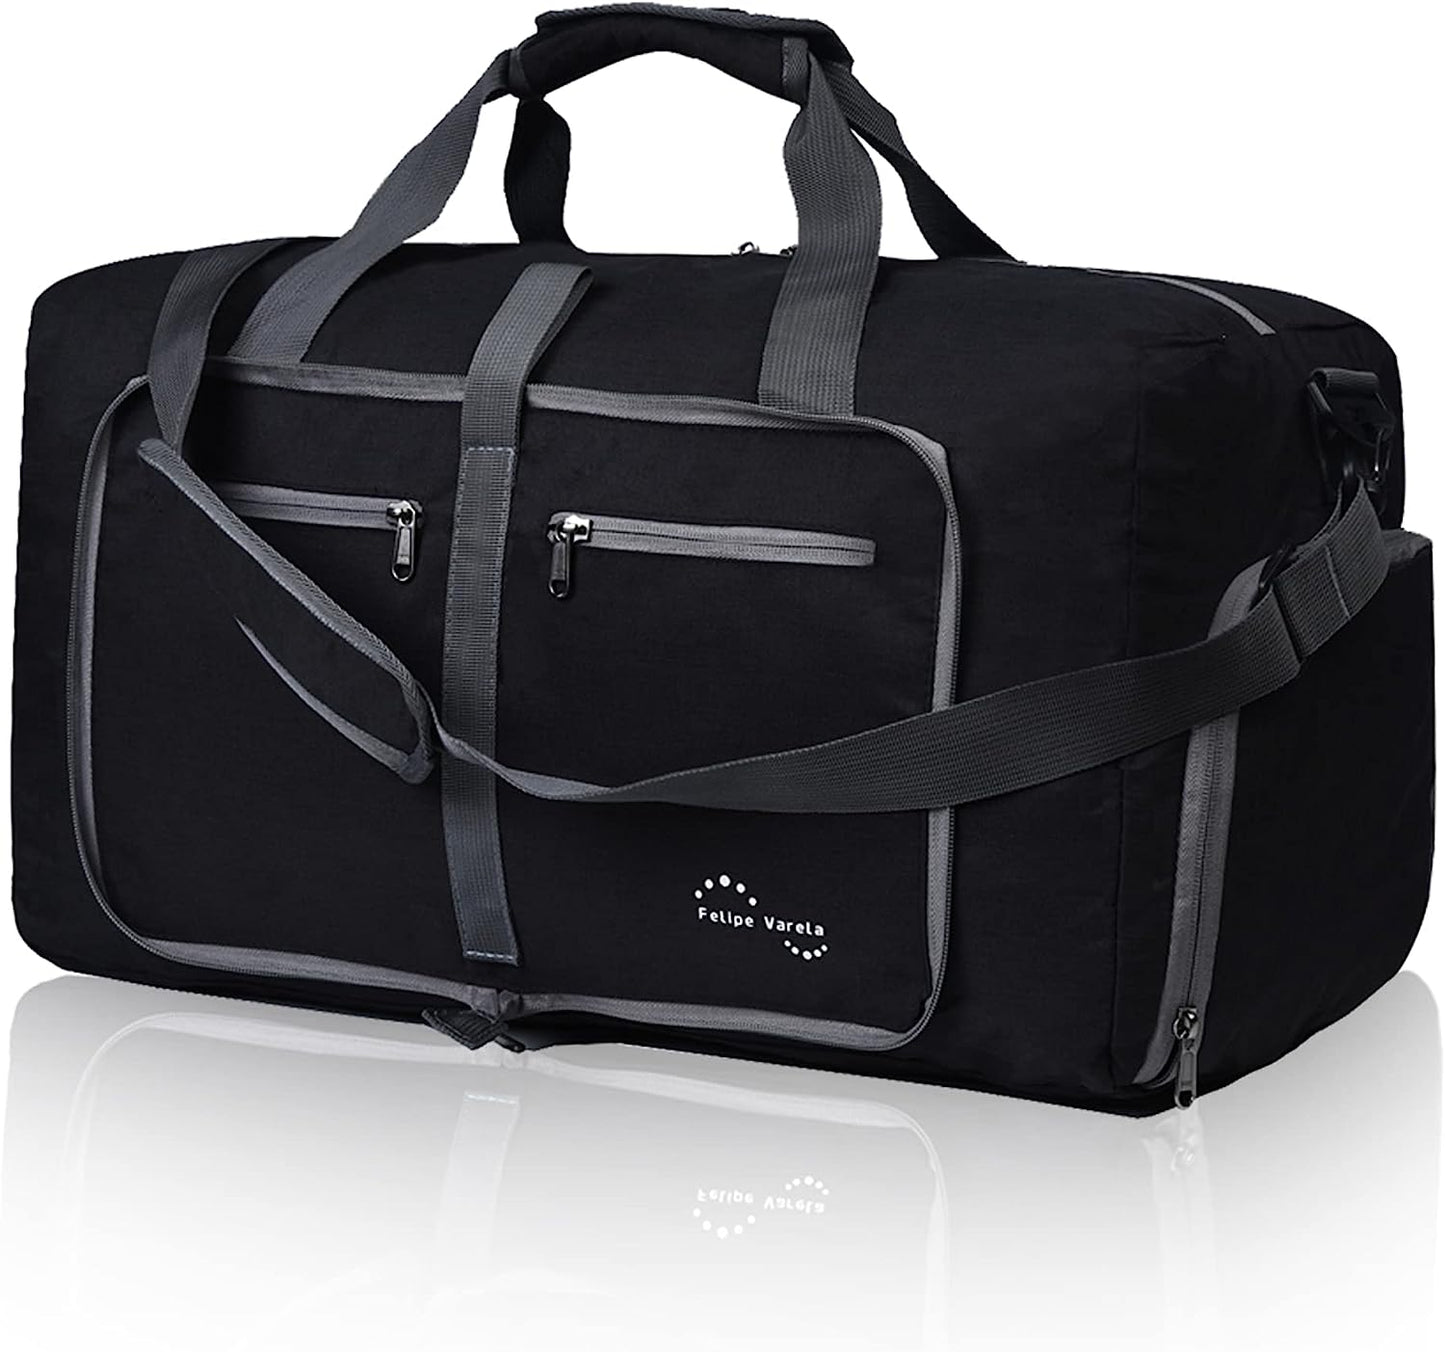 Felipe Varela 40L, 65L, 85L Duffle Bag with Shoes Compartment and Adjustable Strap, Foldable Travel Duffel Bags